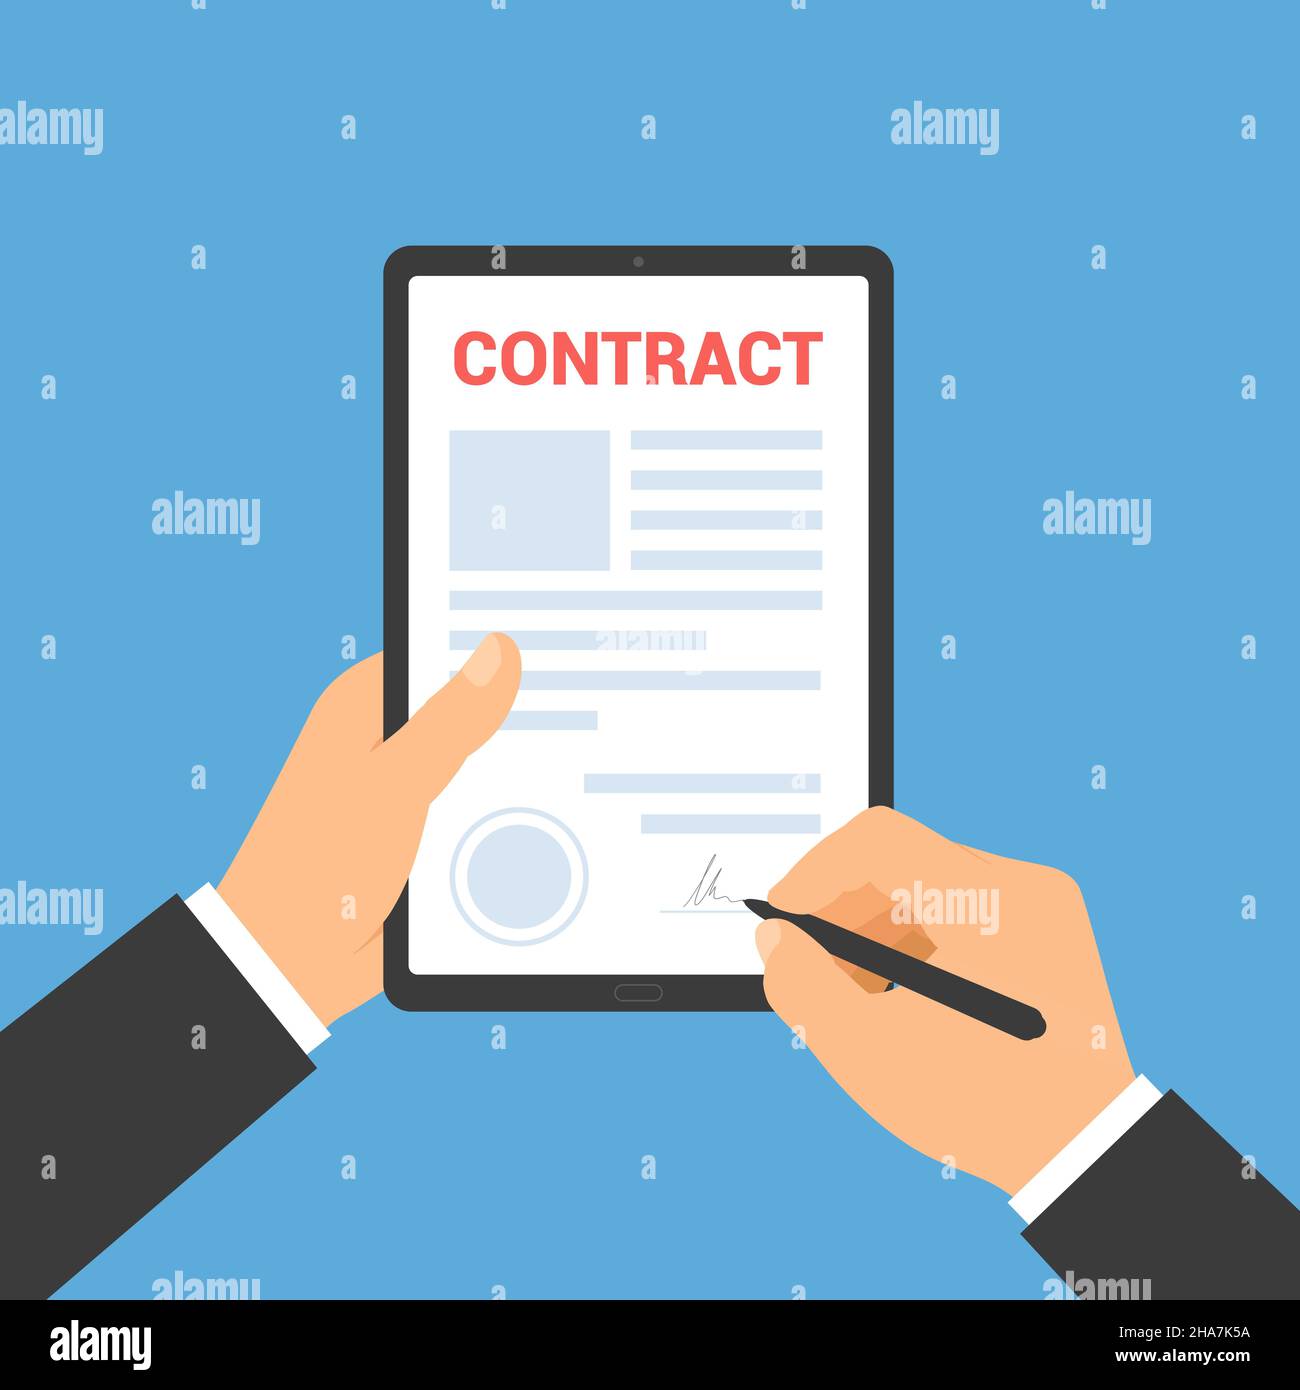 Flat design illustration of a hand of a manager or clerk holding a touch screen tablet. Pen signs a business contract on a blue background - vector Stock Vector